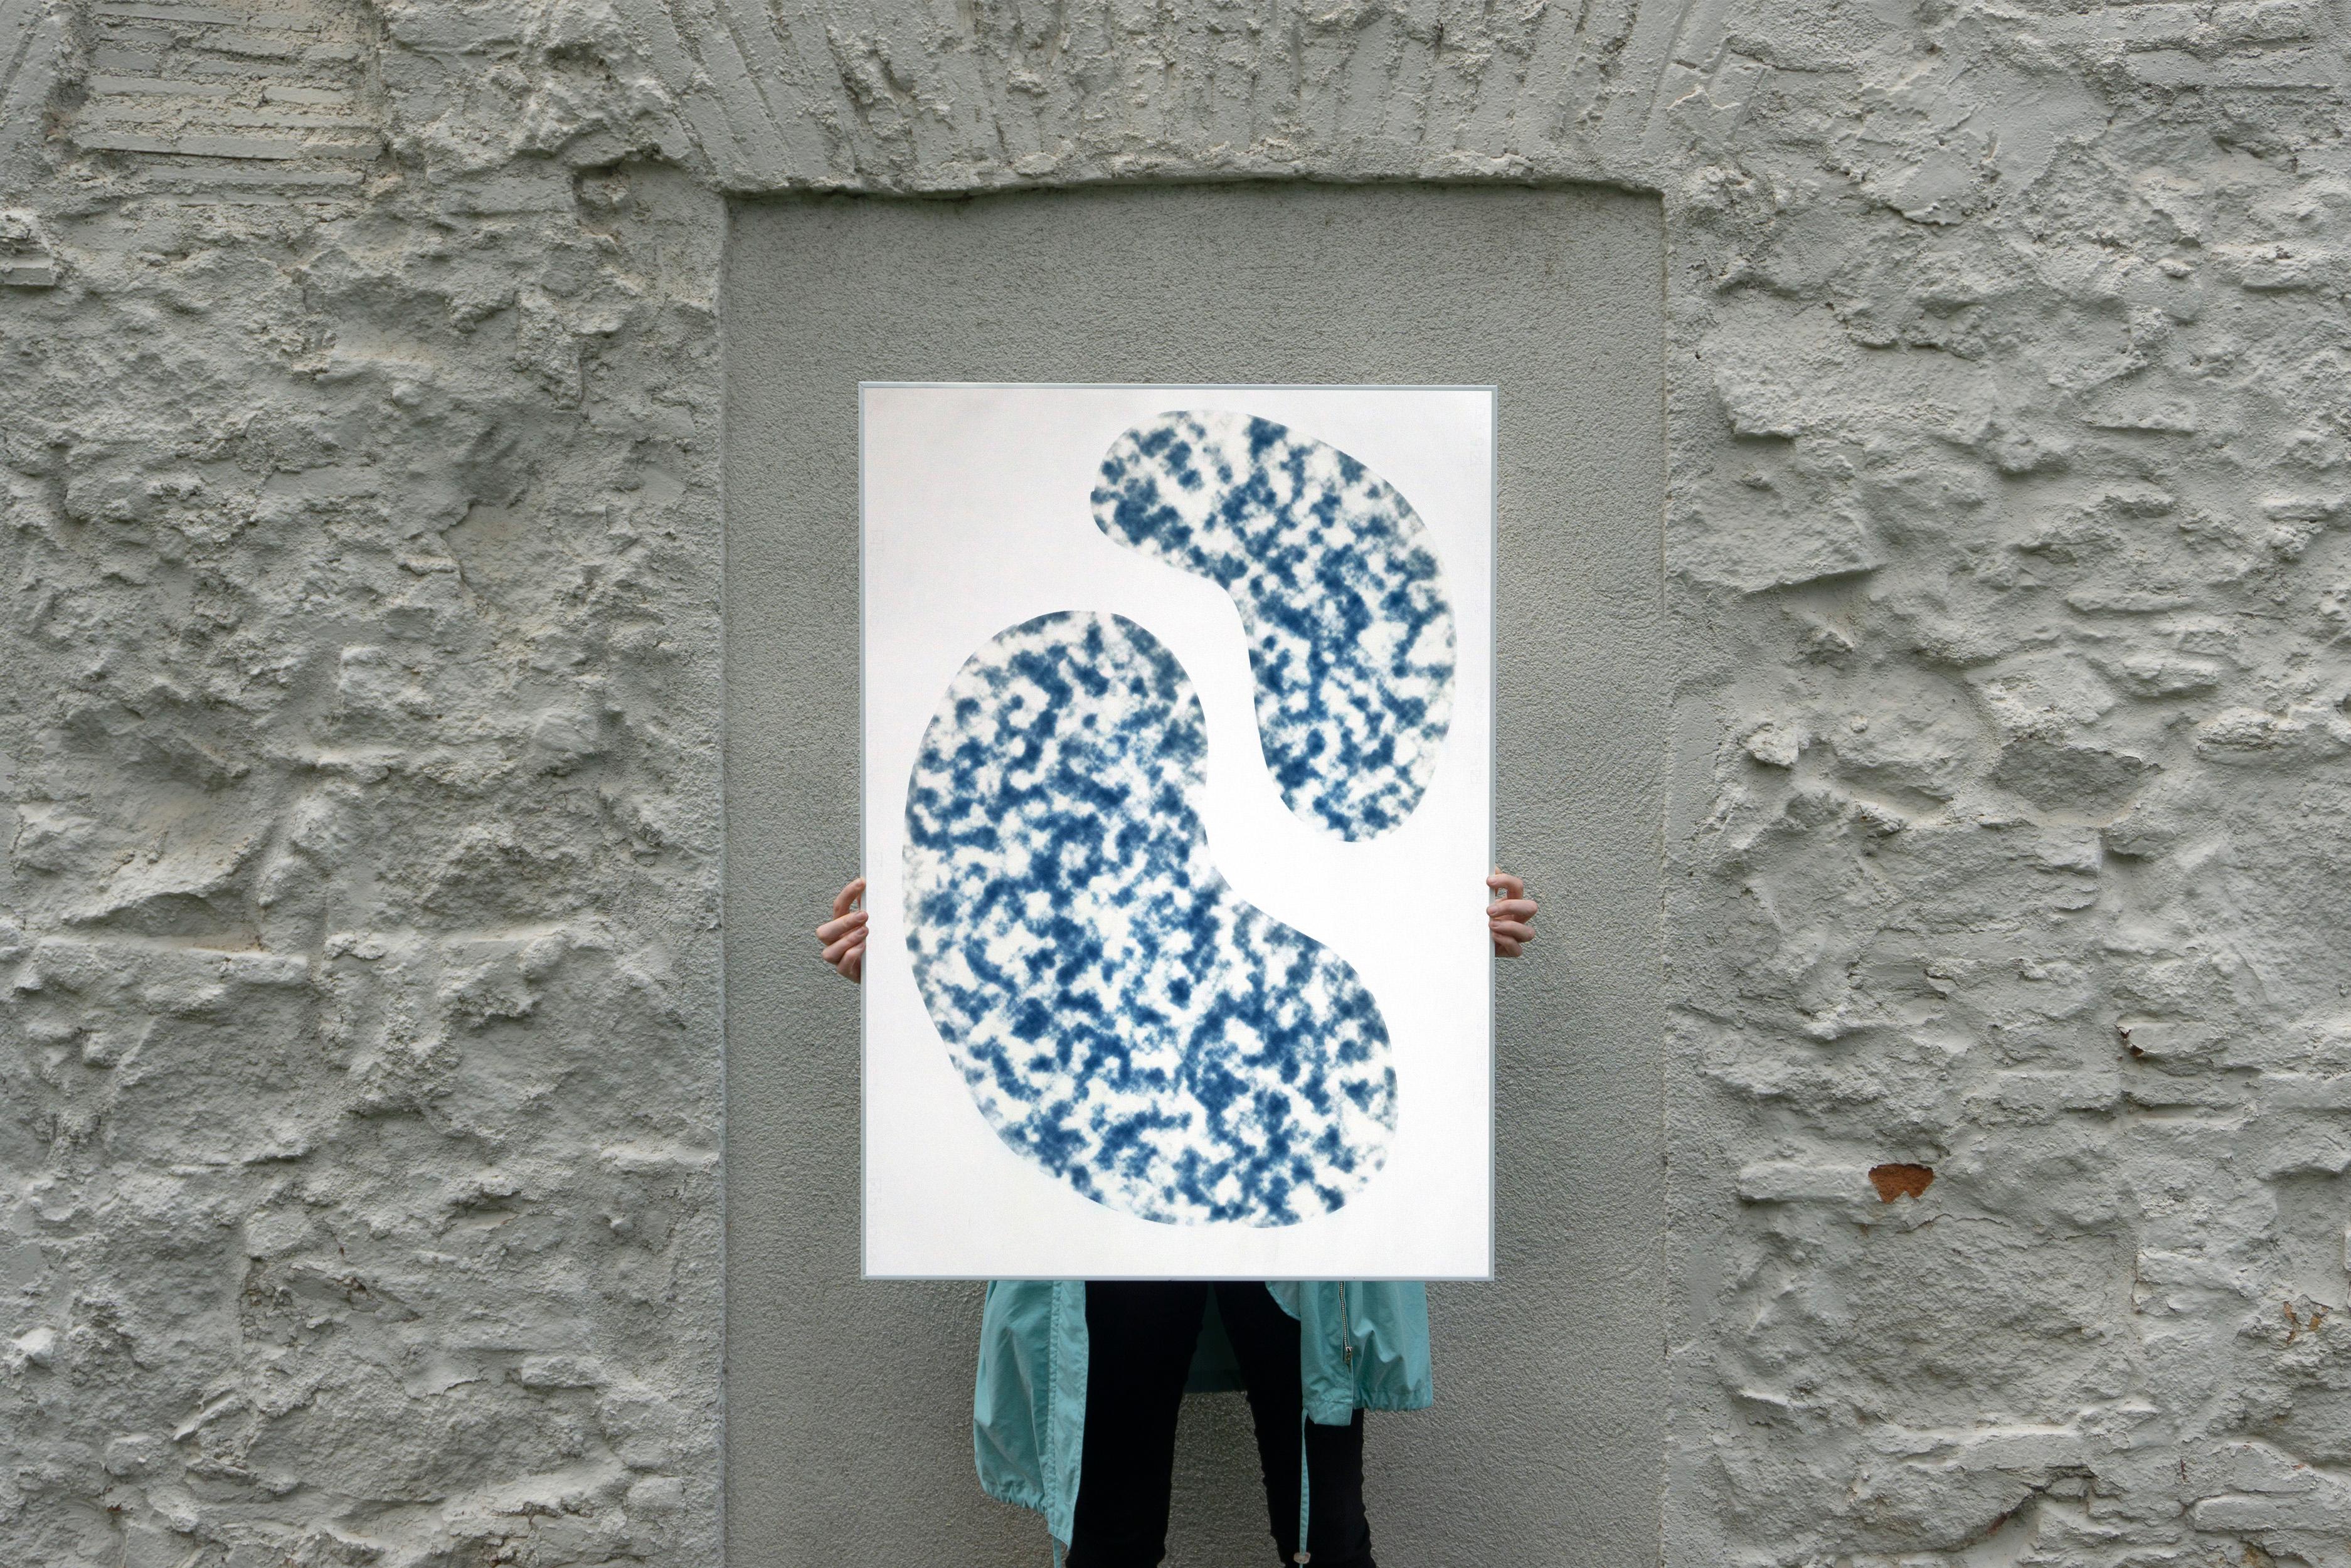 This is a unique cyanotype print imitating Kidney Bean Pools. The emulsion was hand-painted and exposed using a textured photo negative. 

Frame is for illustrative purposes only, artwork is sent carefully rolled in a tube. 

Details:
+ Title: